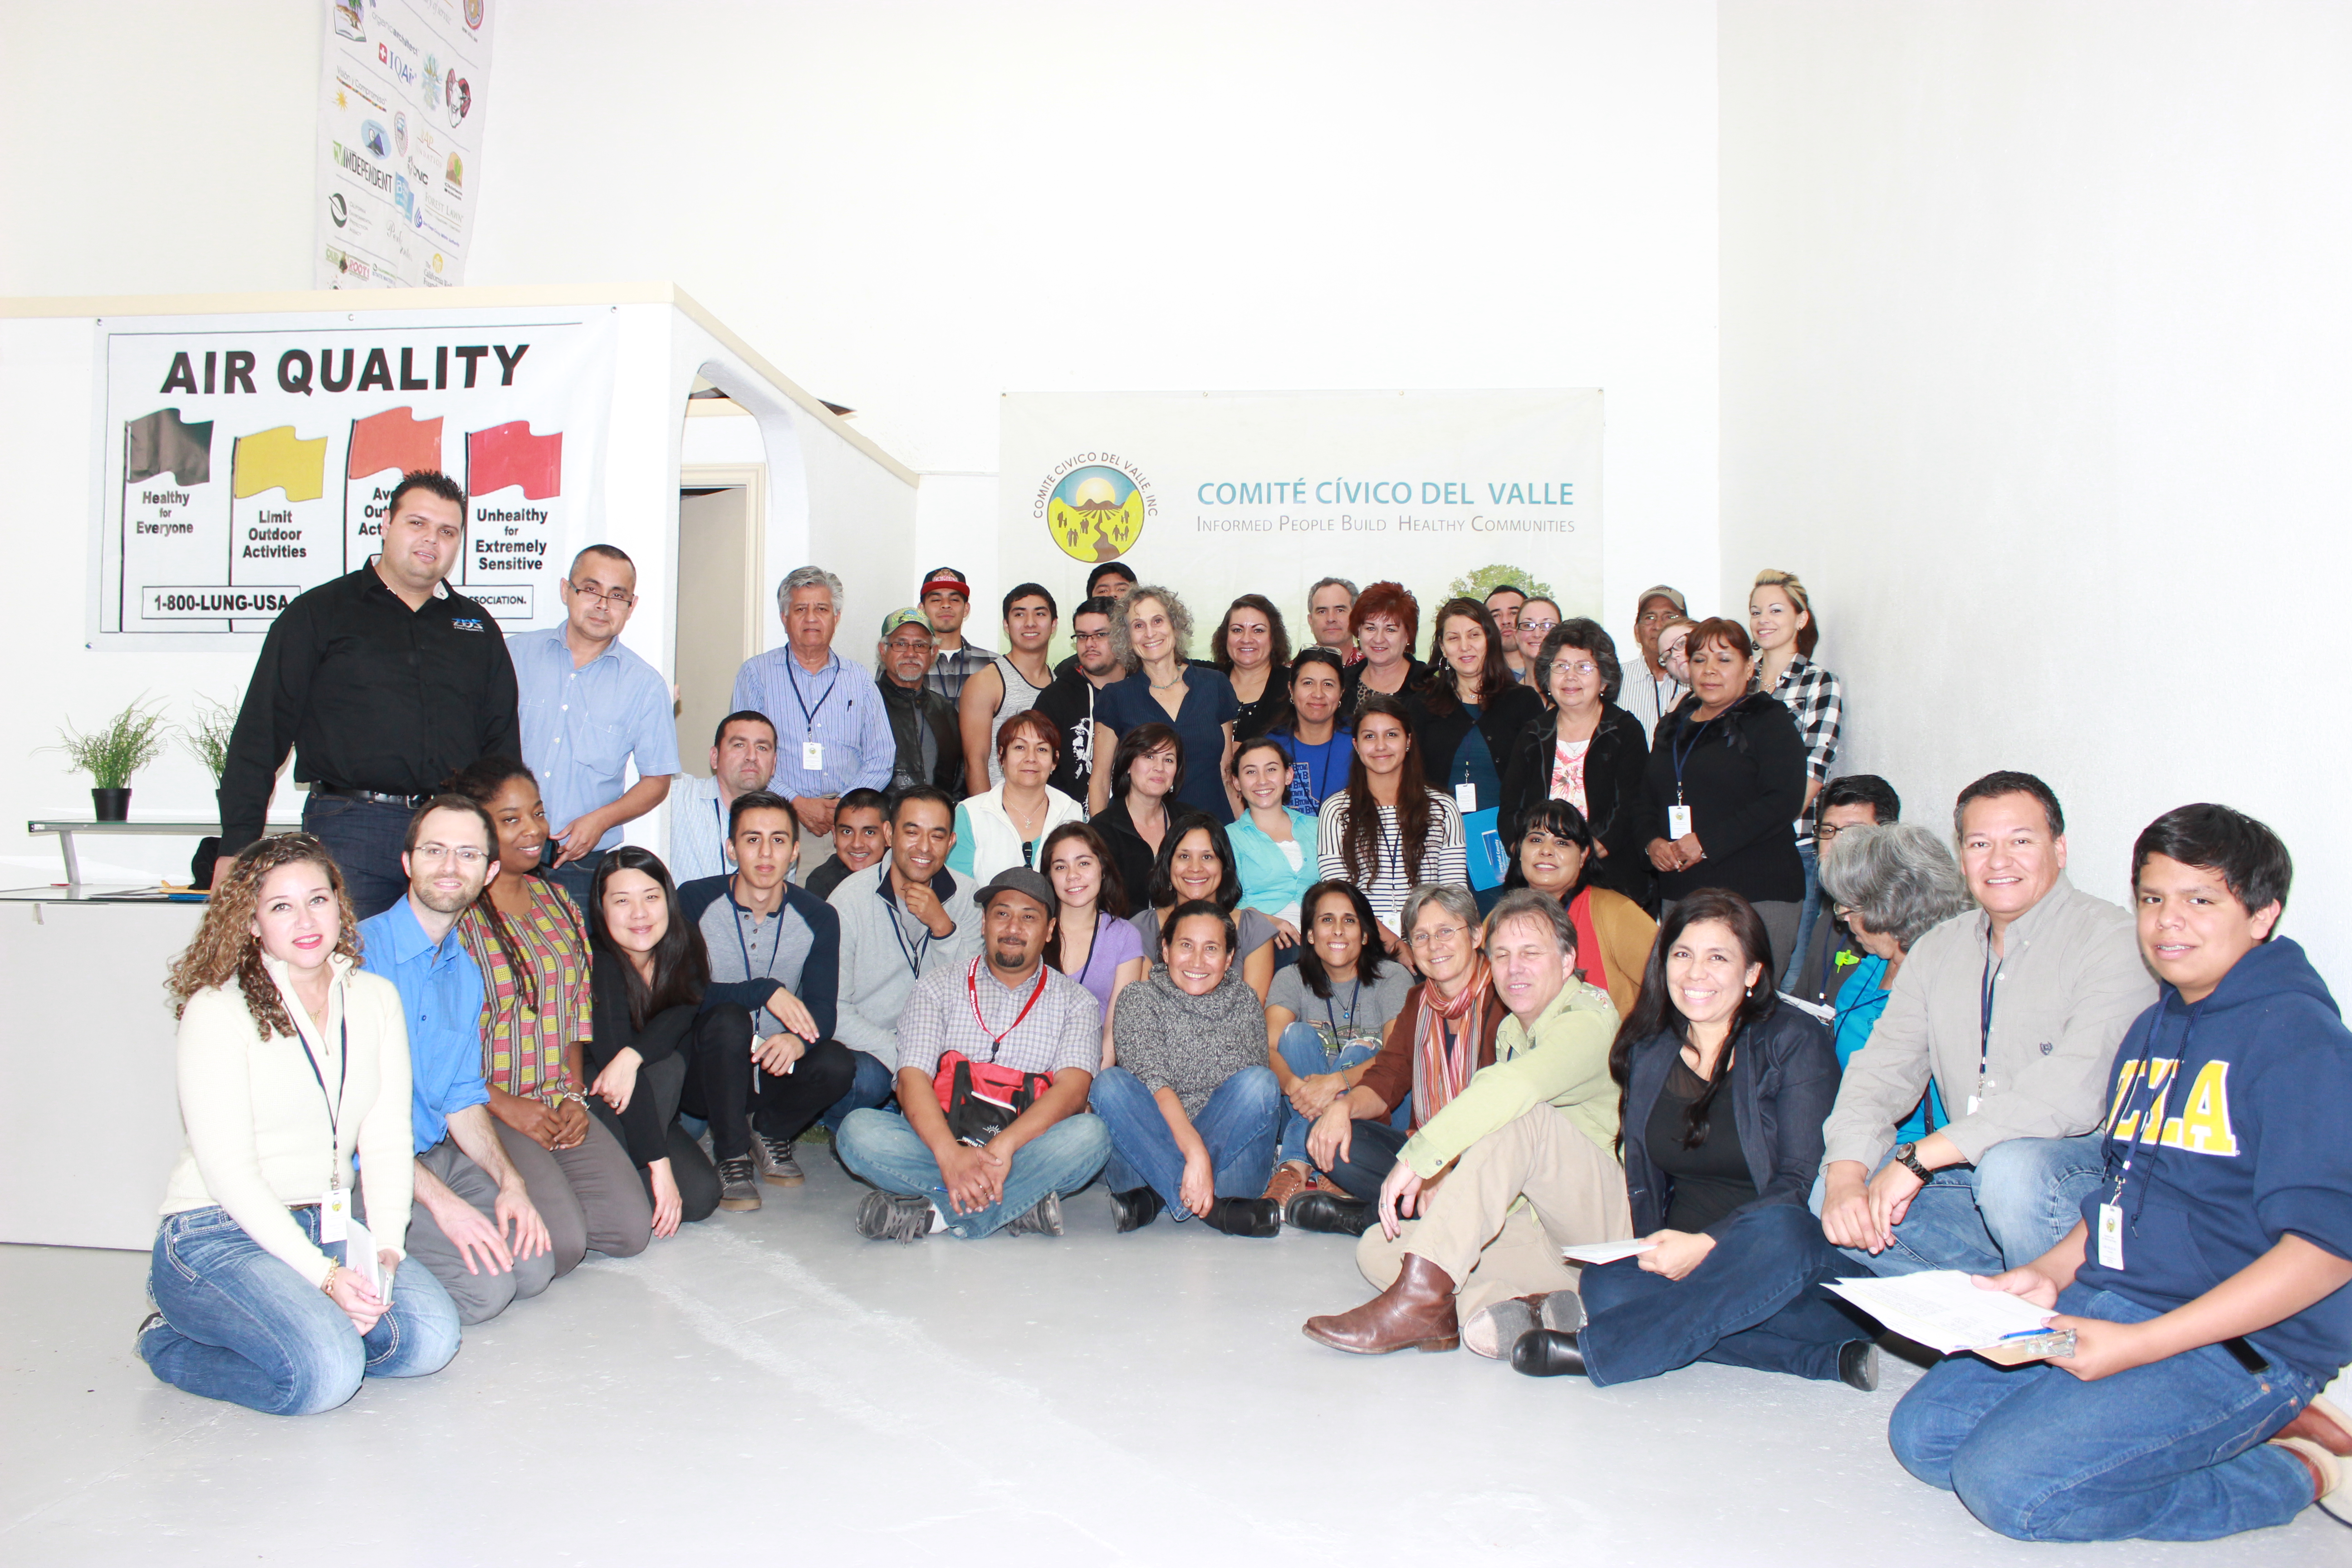 participants and project staff